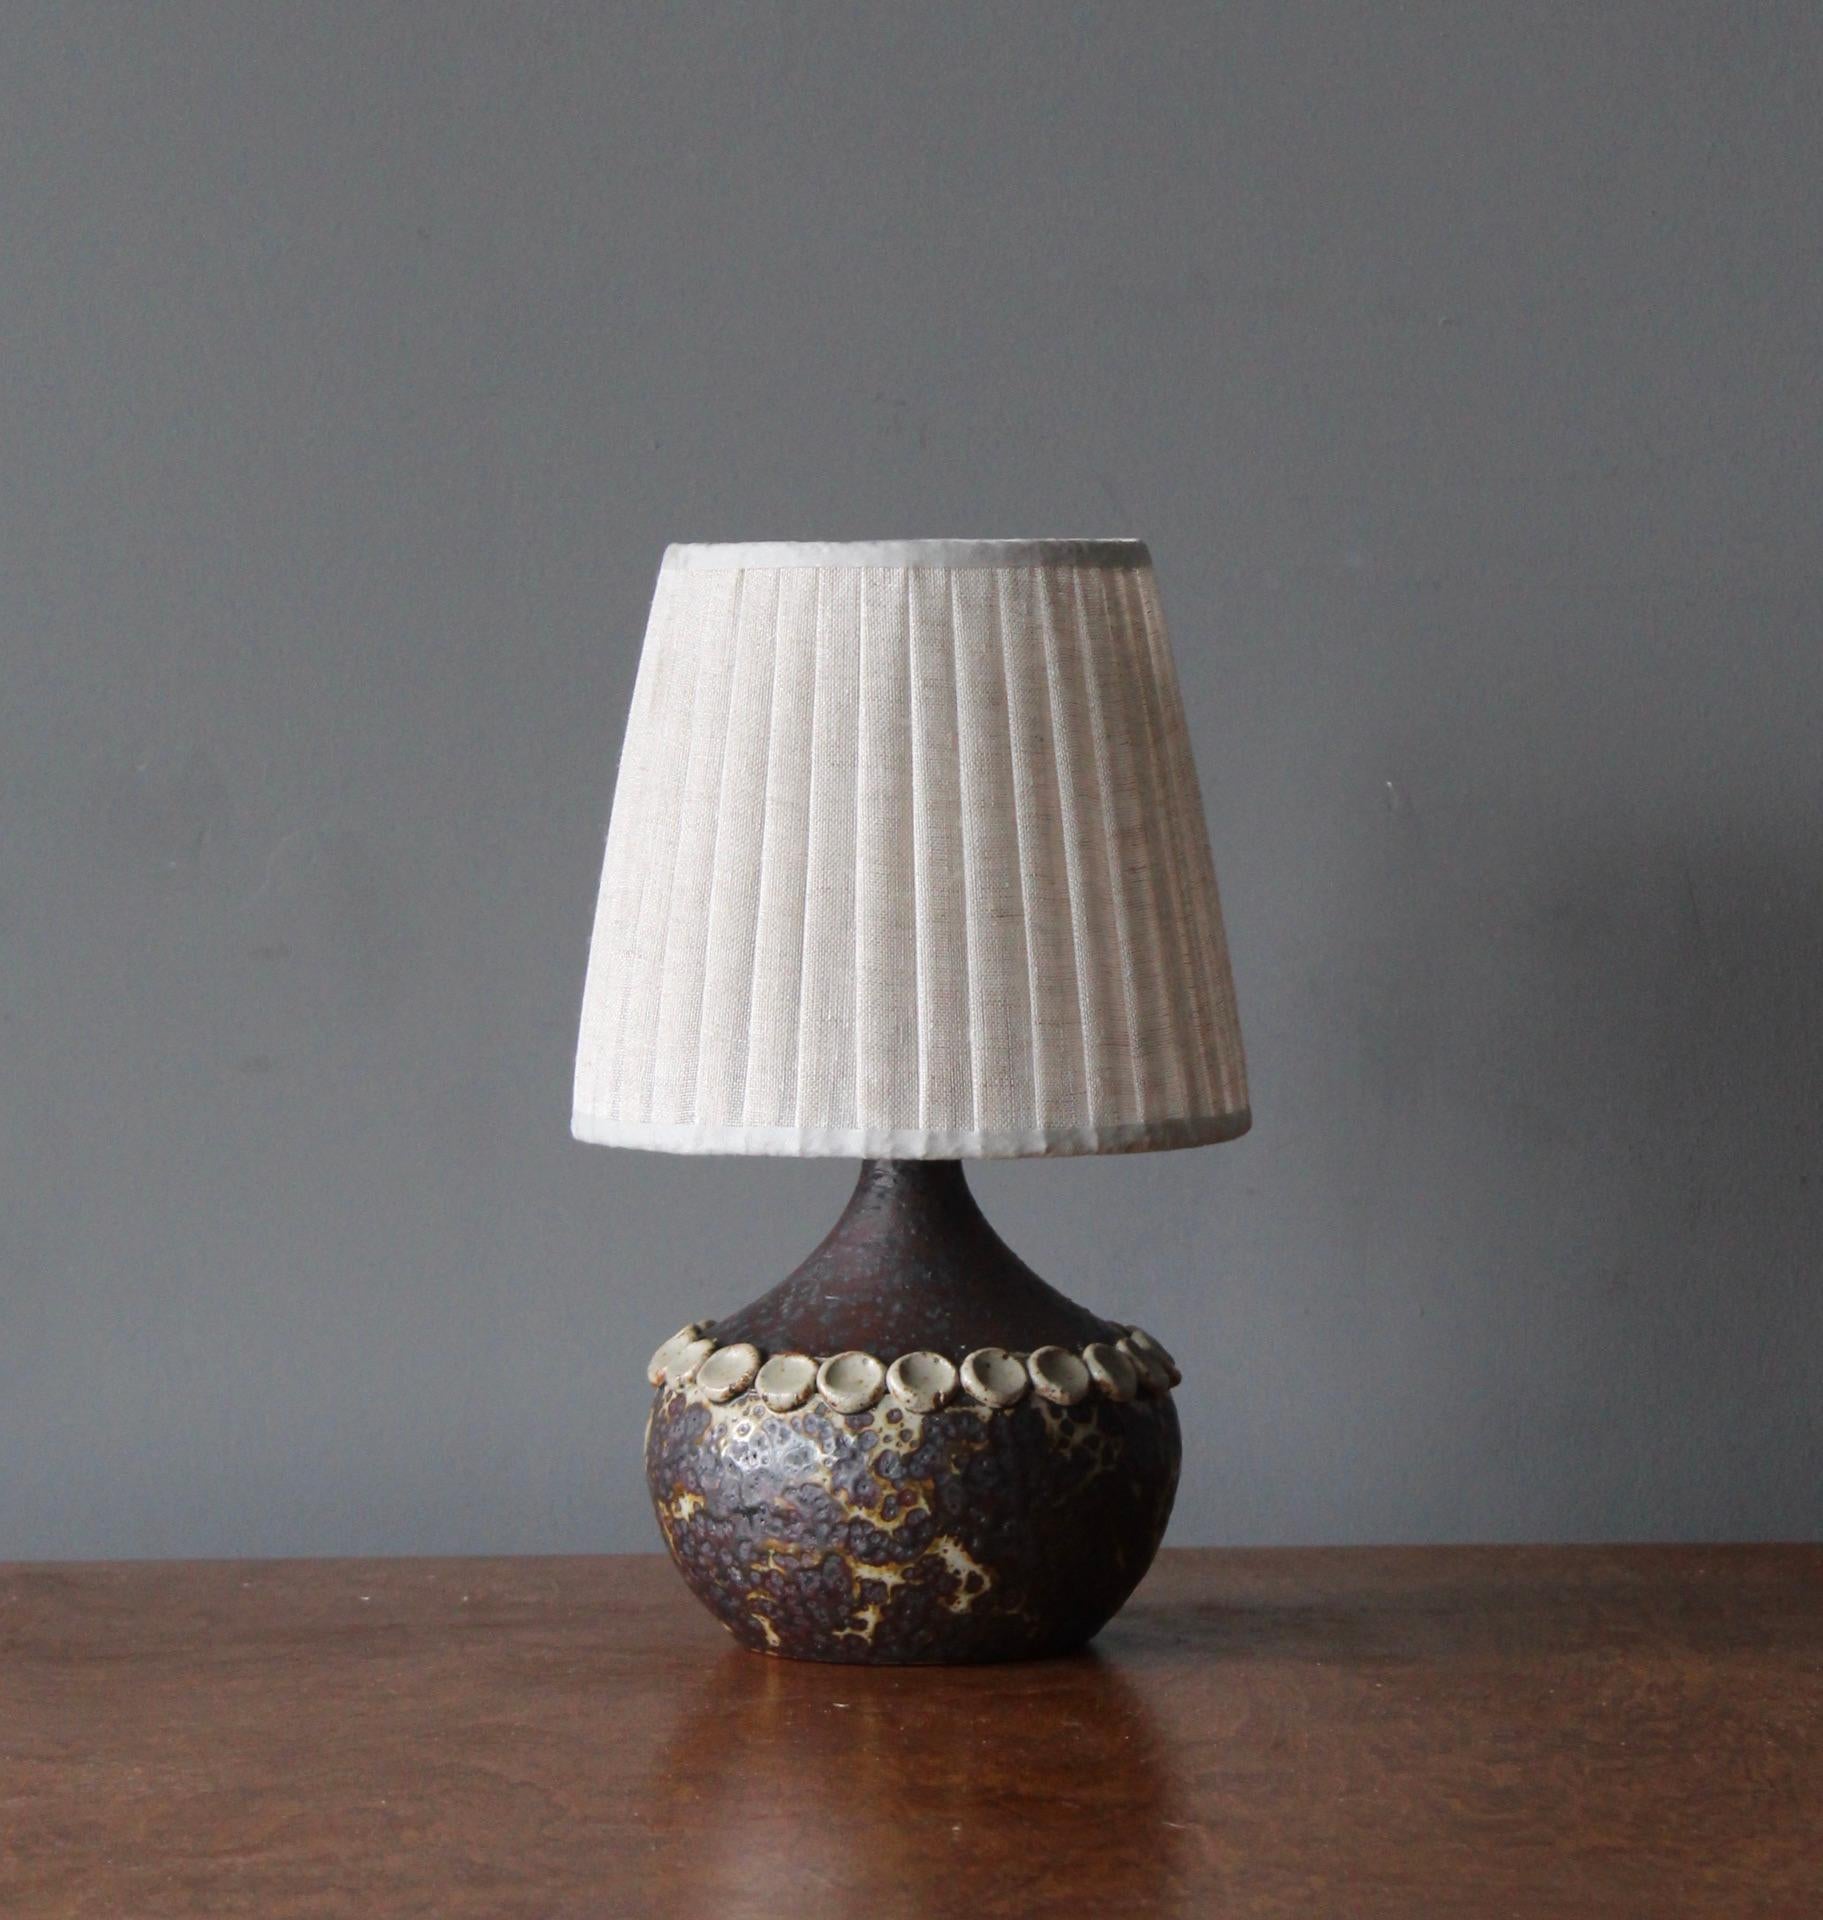 A table lamp. Produced and designed by Claes Thell, Artist's studio, Höganäs, Sweden.

In glazed stoneware. Stated dimensions exclude lampshade. Height includes socket. Illustrated rattan lampshade can be included upon request.